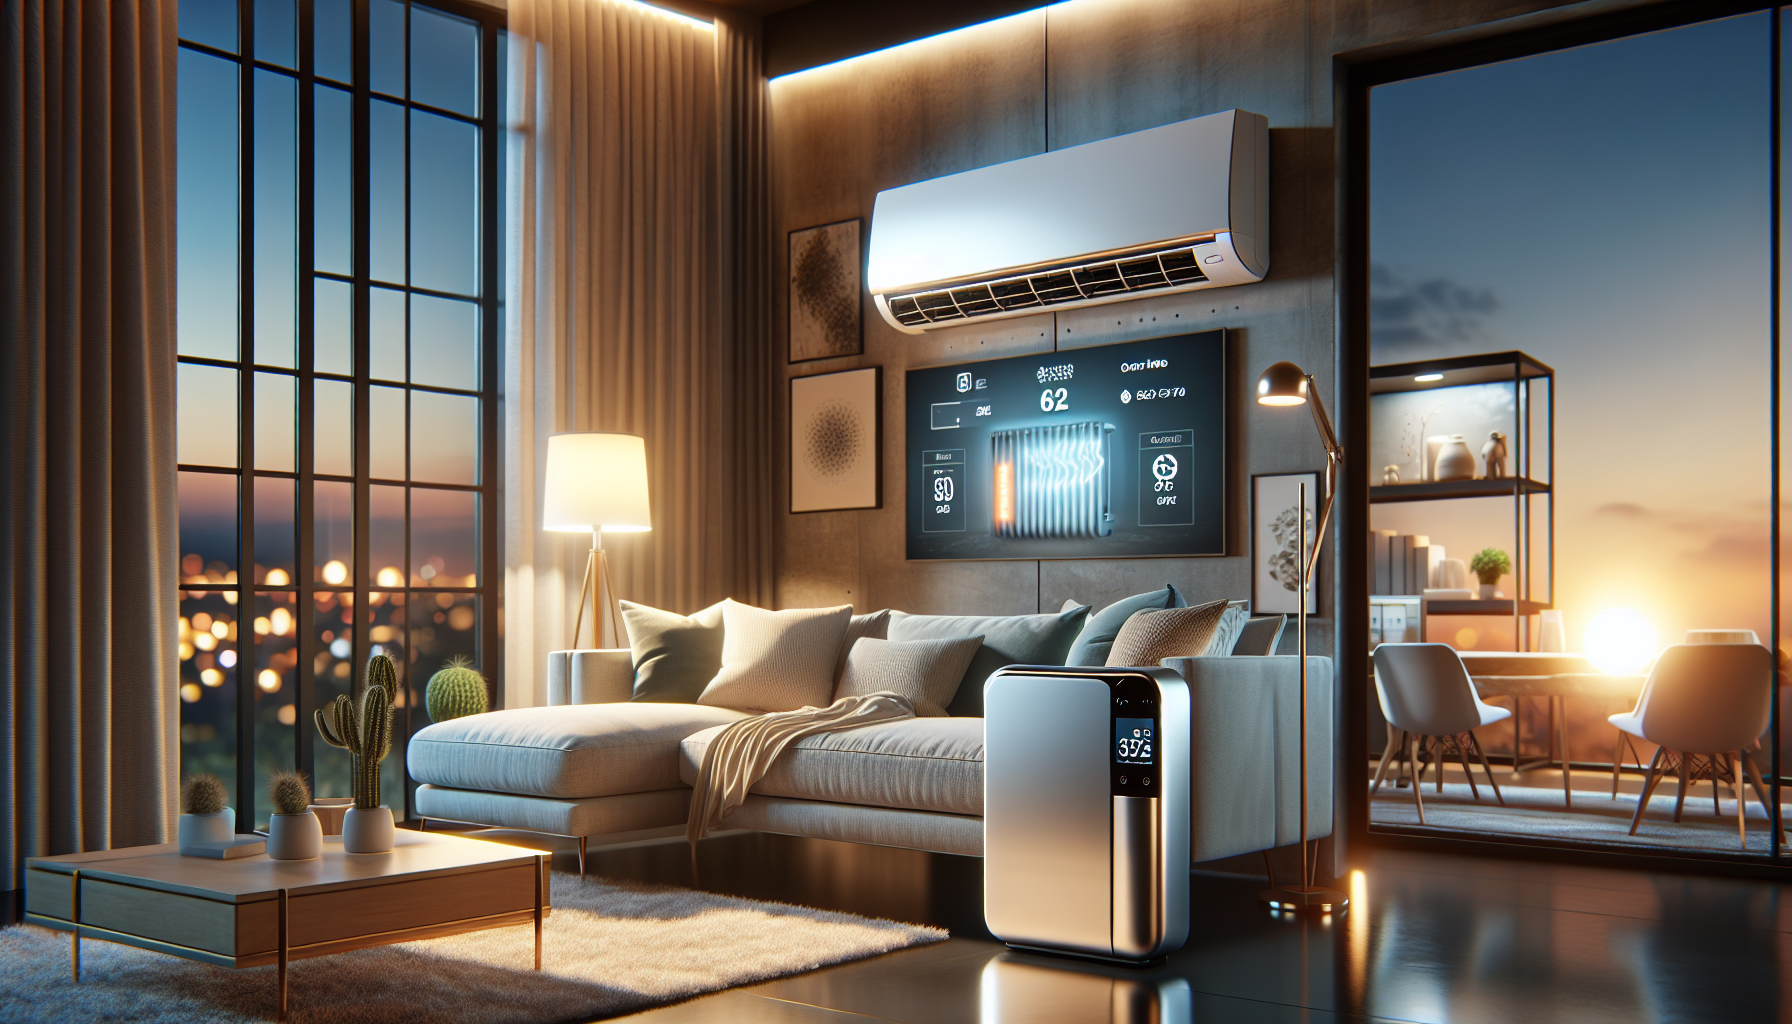 Rinnai heating and cooling products for energy-efficient home comfort